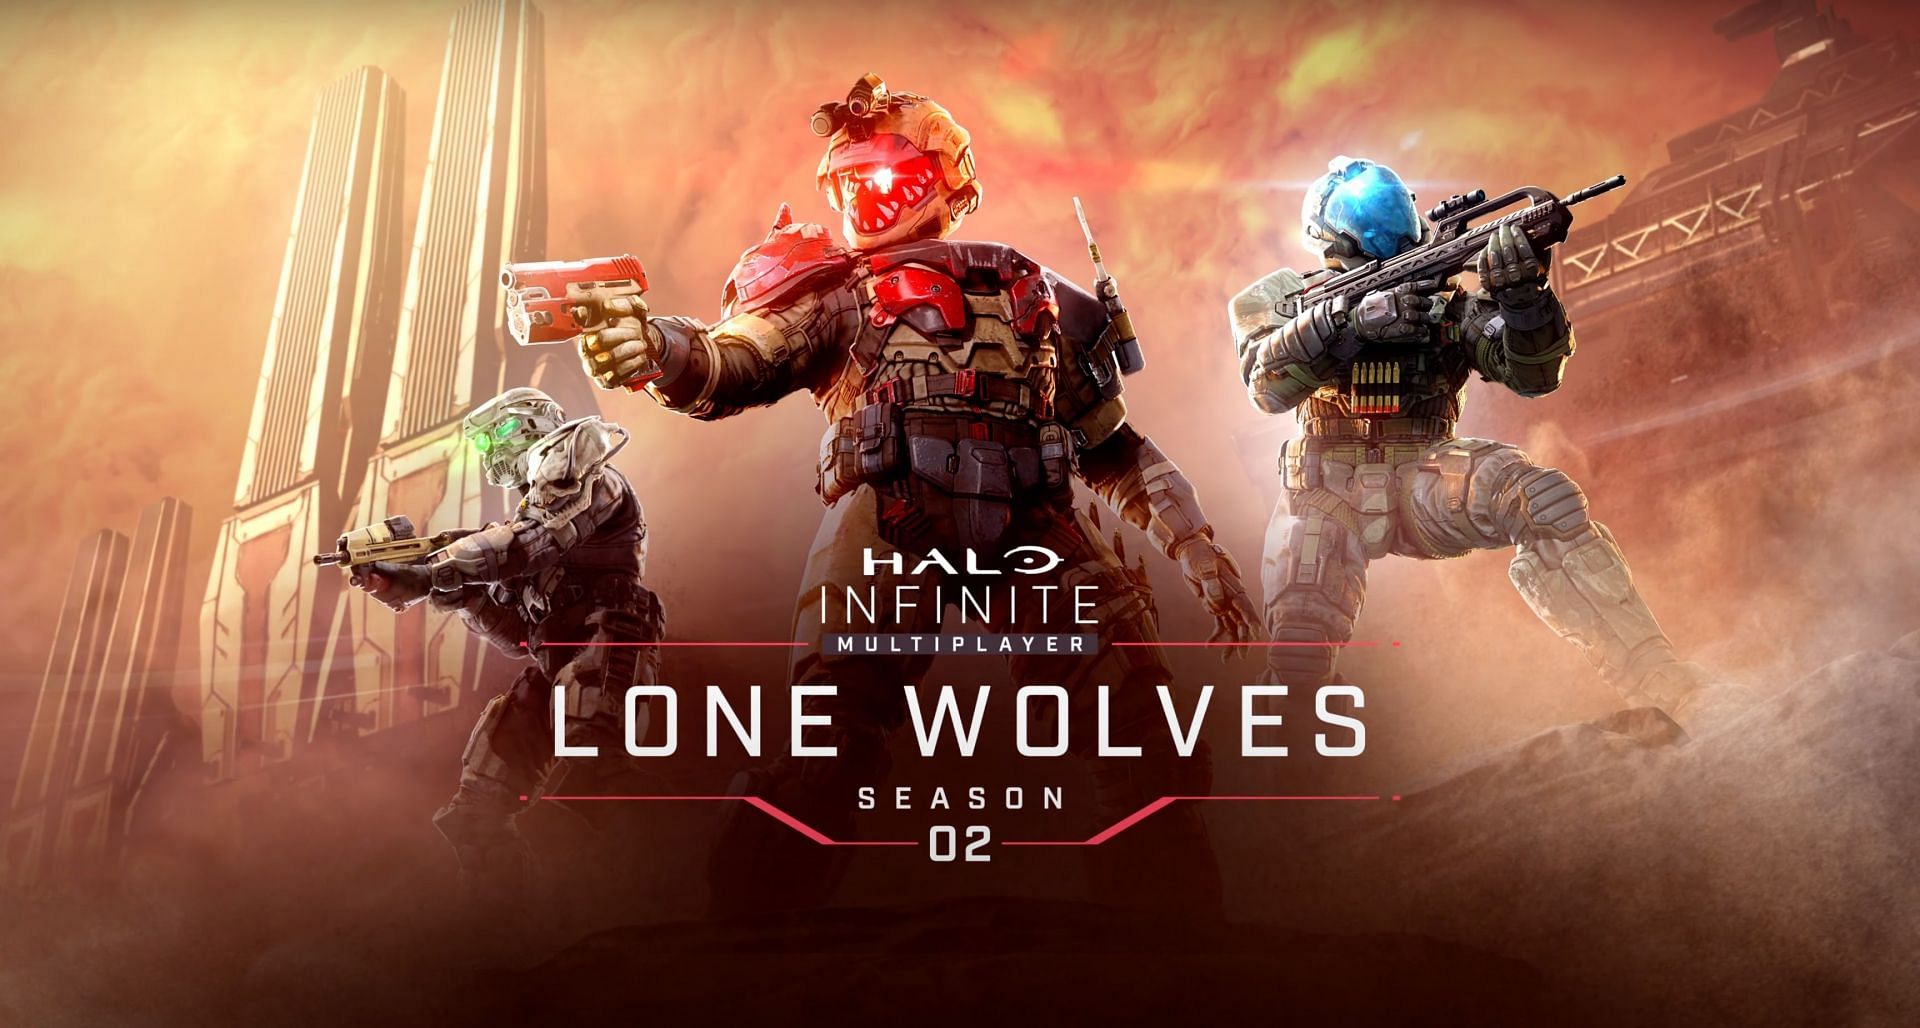 Season 02 Lone Wolves launches on May 3, 2022 (Image via Xbox)